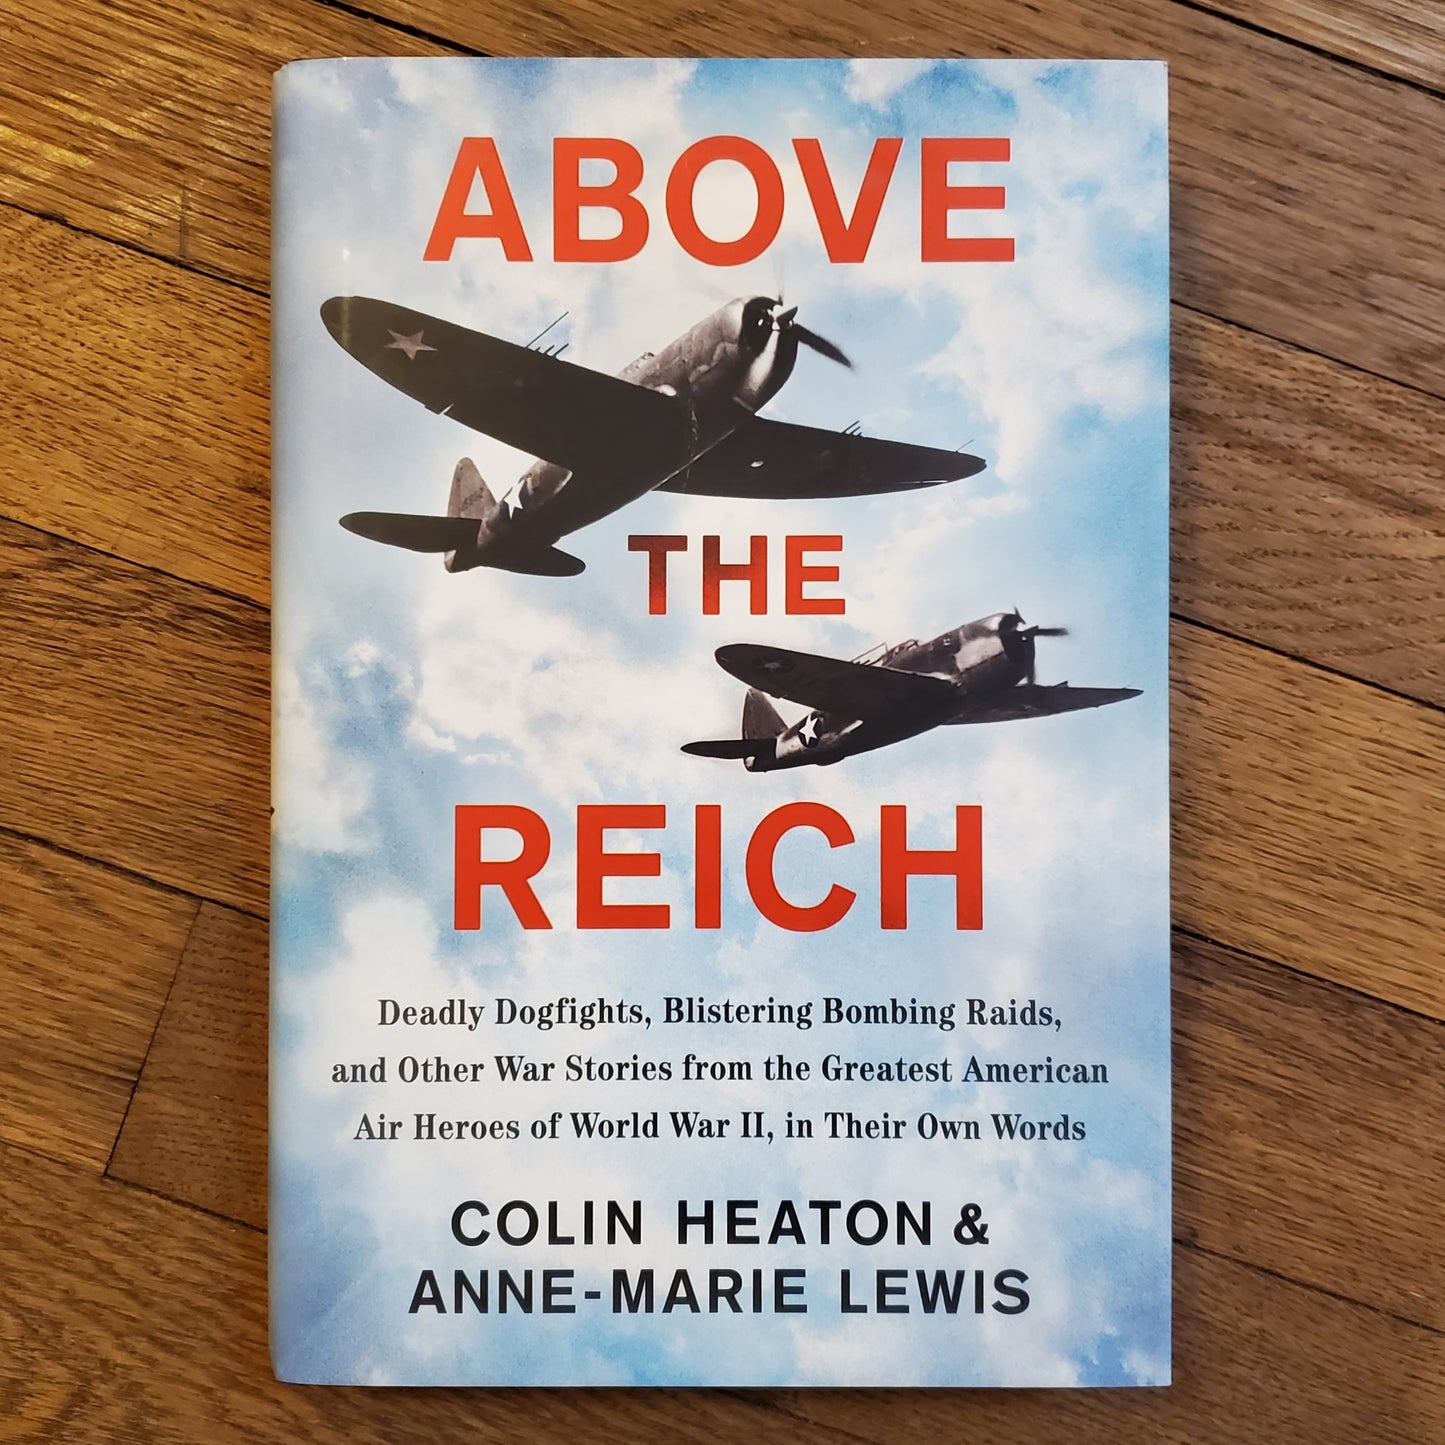 GB Above the Reich: Deadly Dogfights, Blistering Bombing Raids, and Other War Stories from the Greatest American Air Heroes of World War II